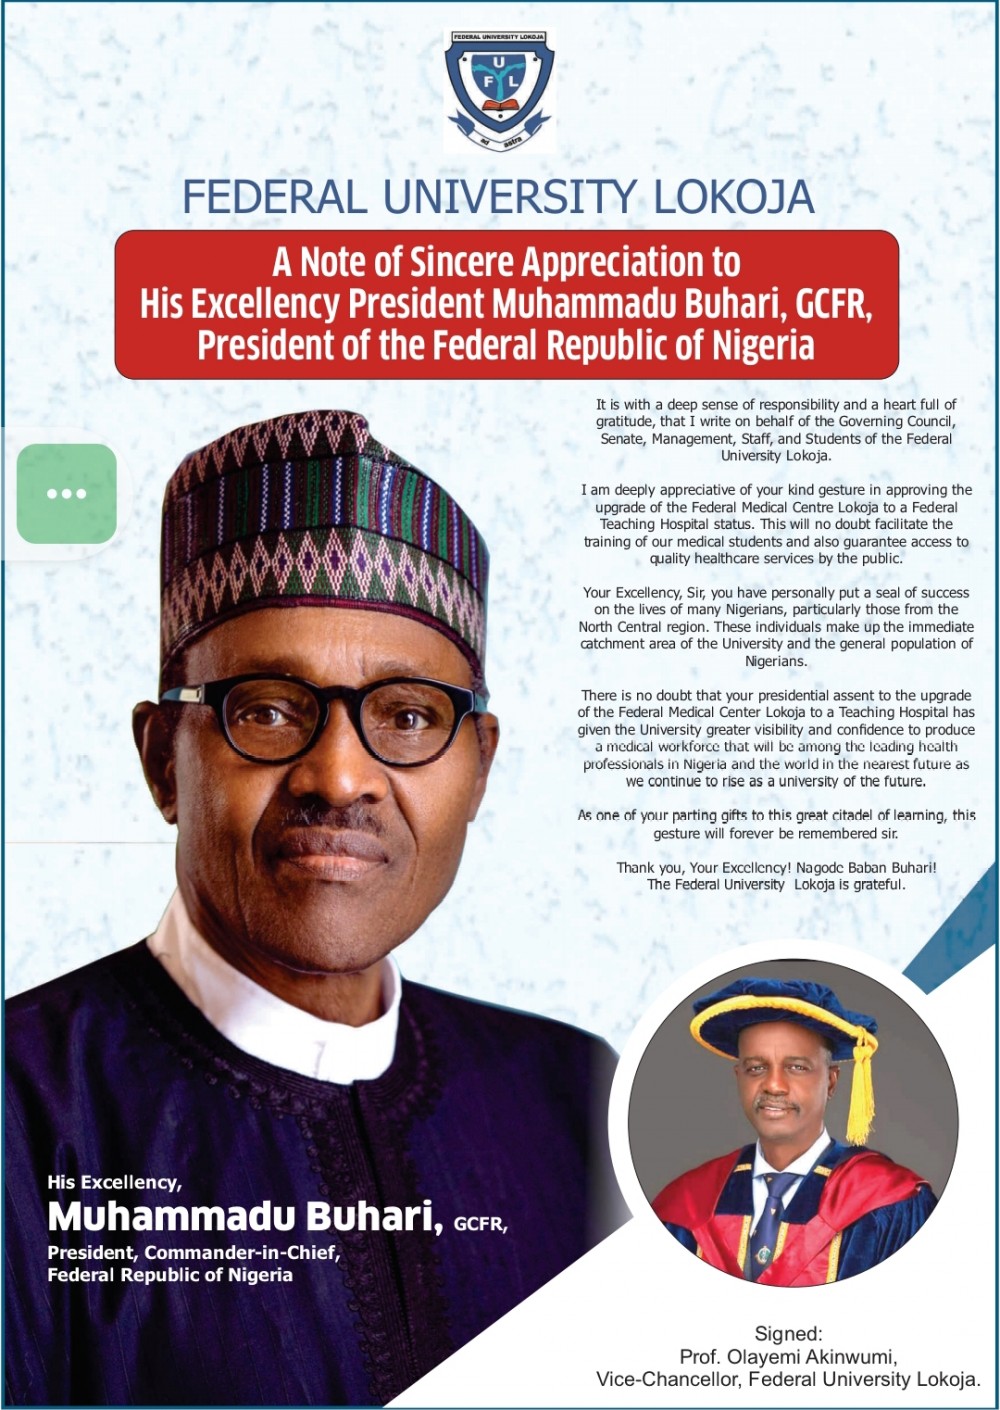 a-note-of-sincere-appreciation-to-his-excellency-president-muhammadu-buhari-gcfr-president-of-the-federal-republic-of-nigeria